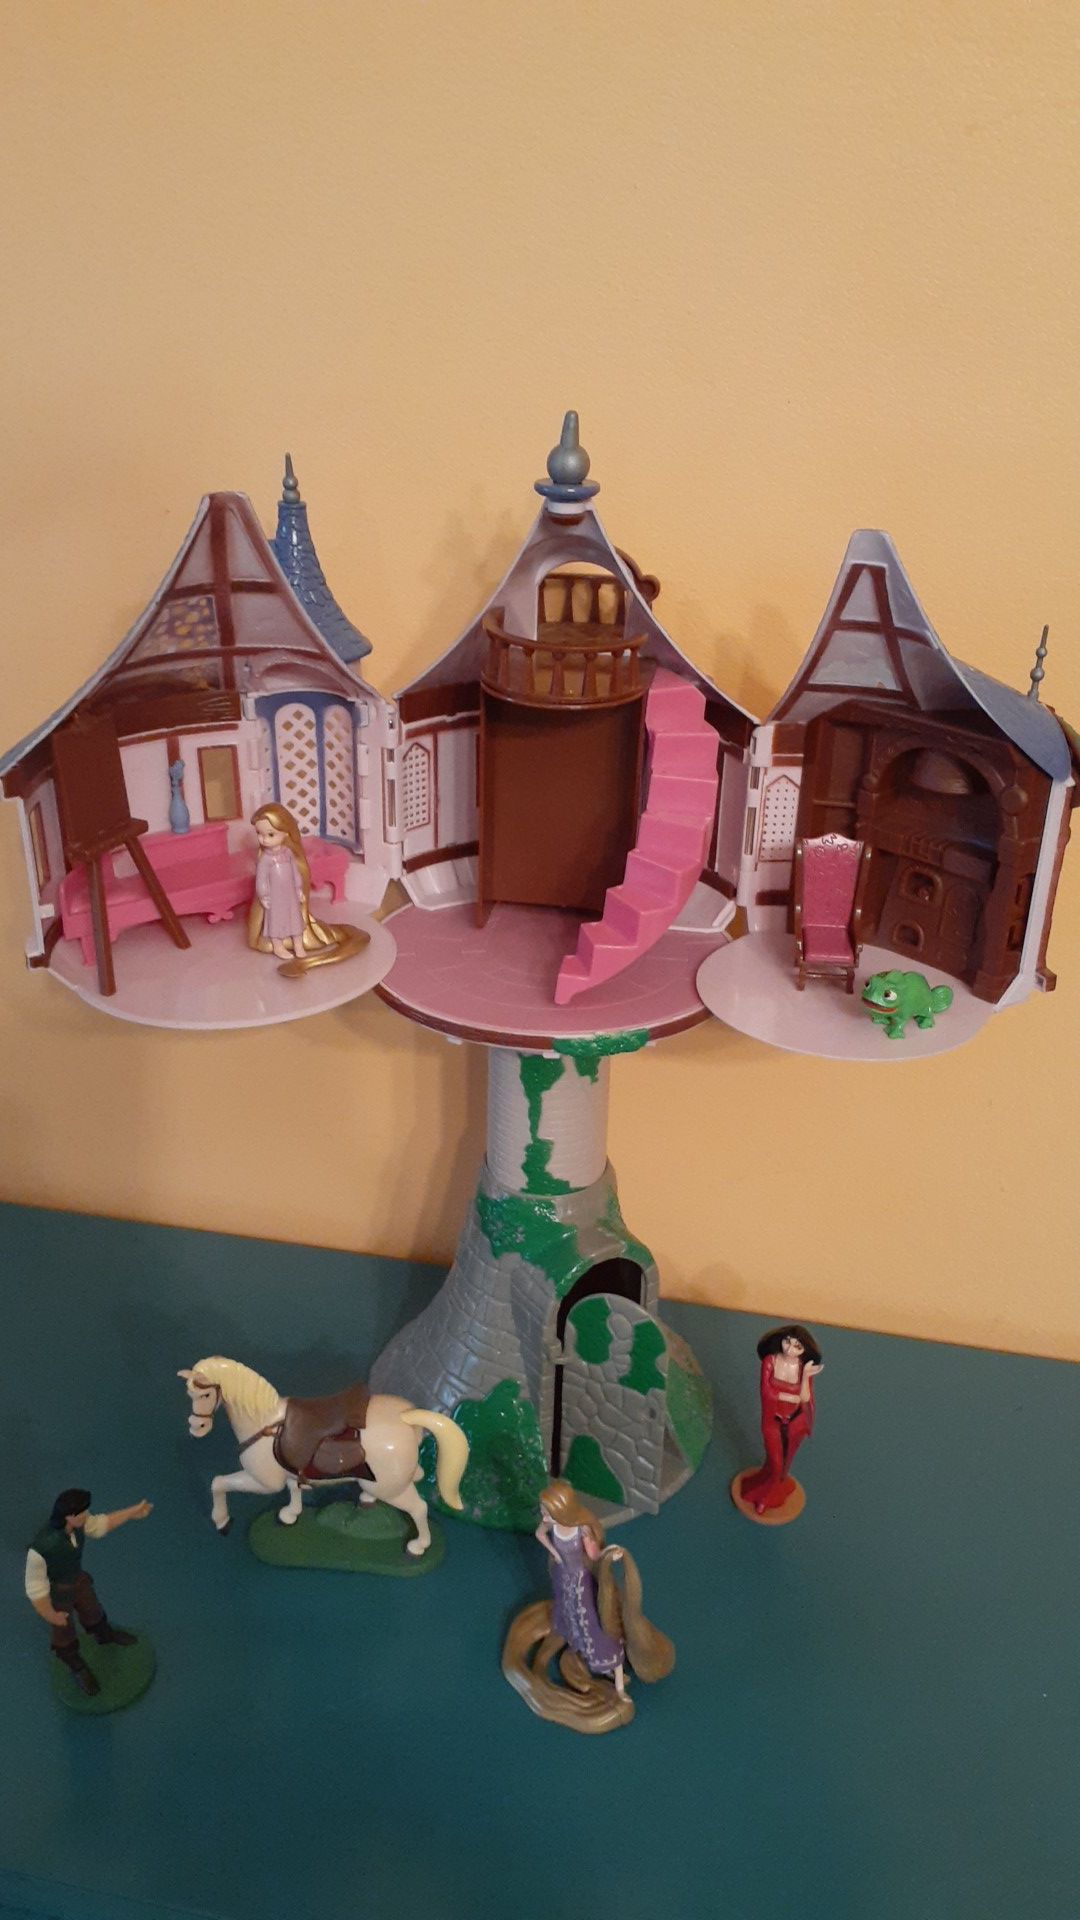 Disney's Tangled. Rapunzel's tower and figurines